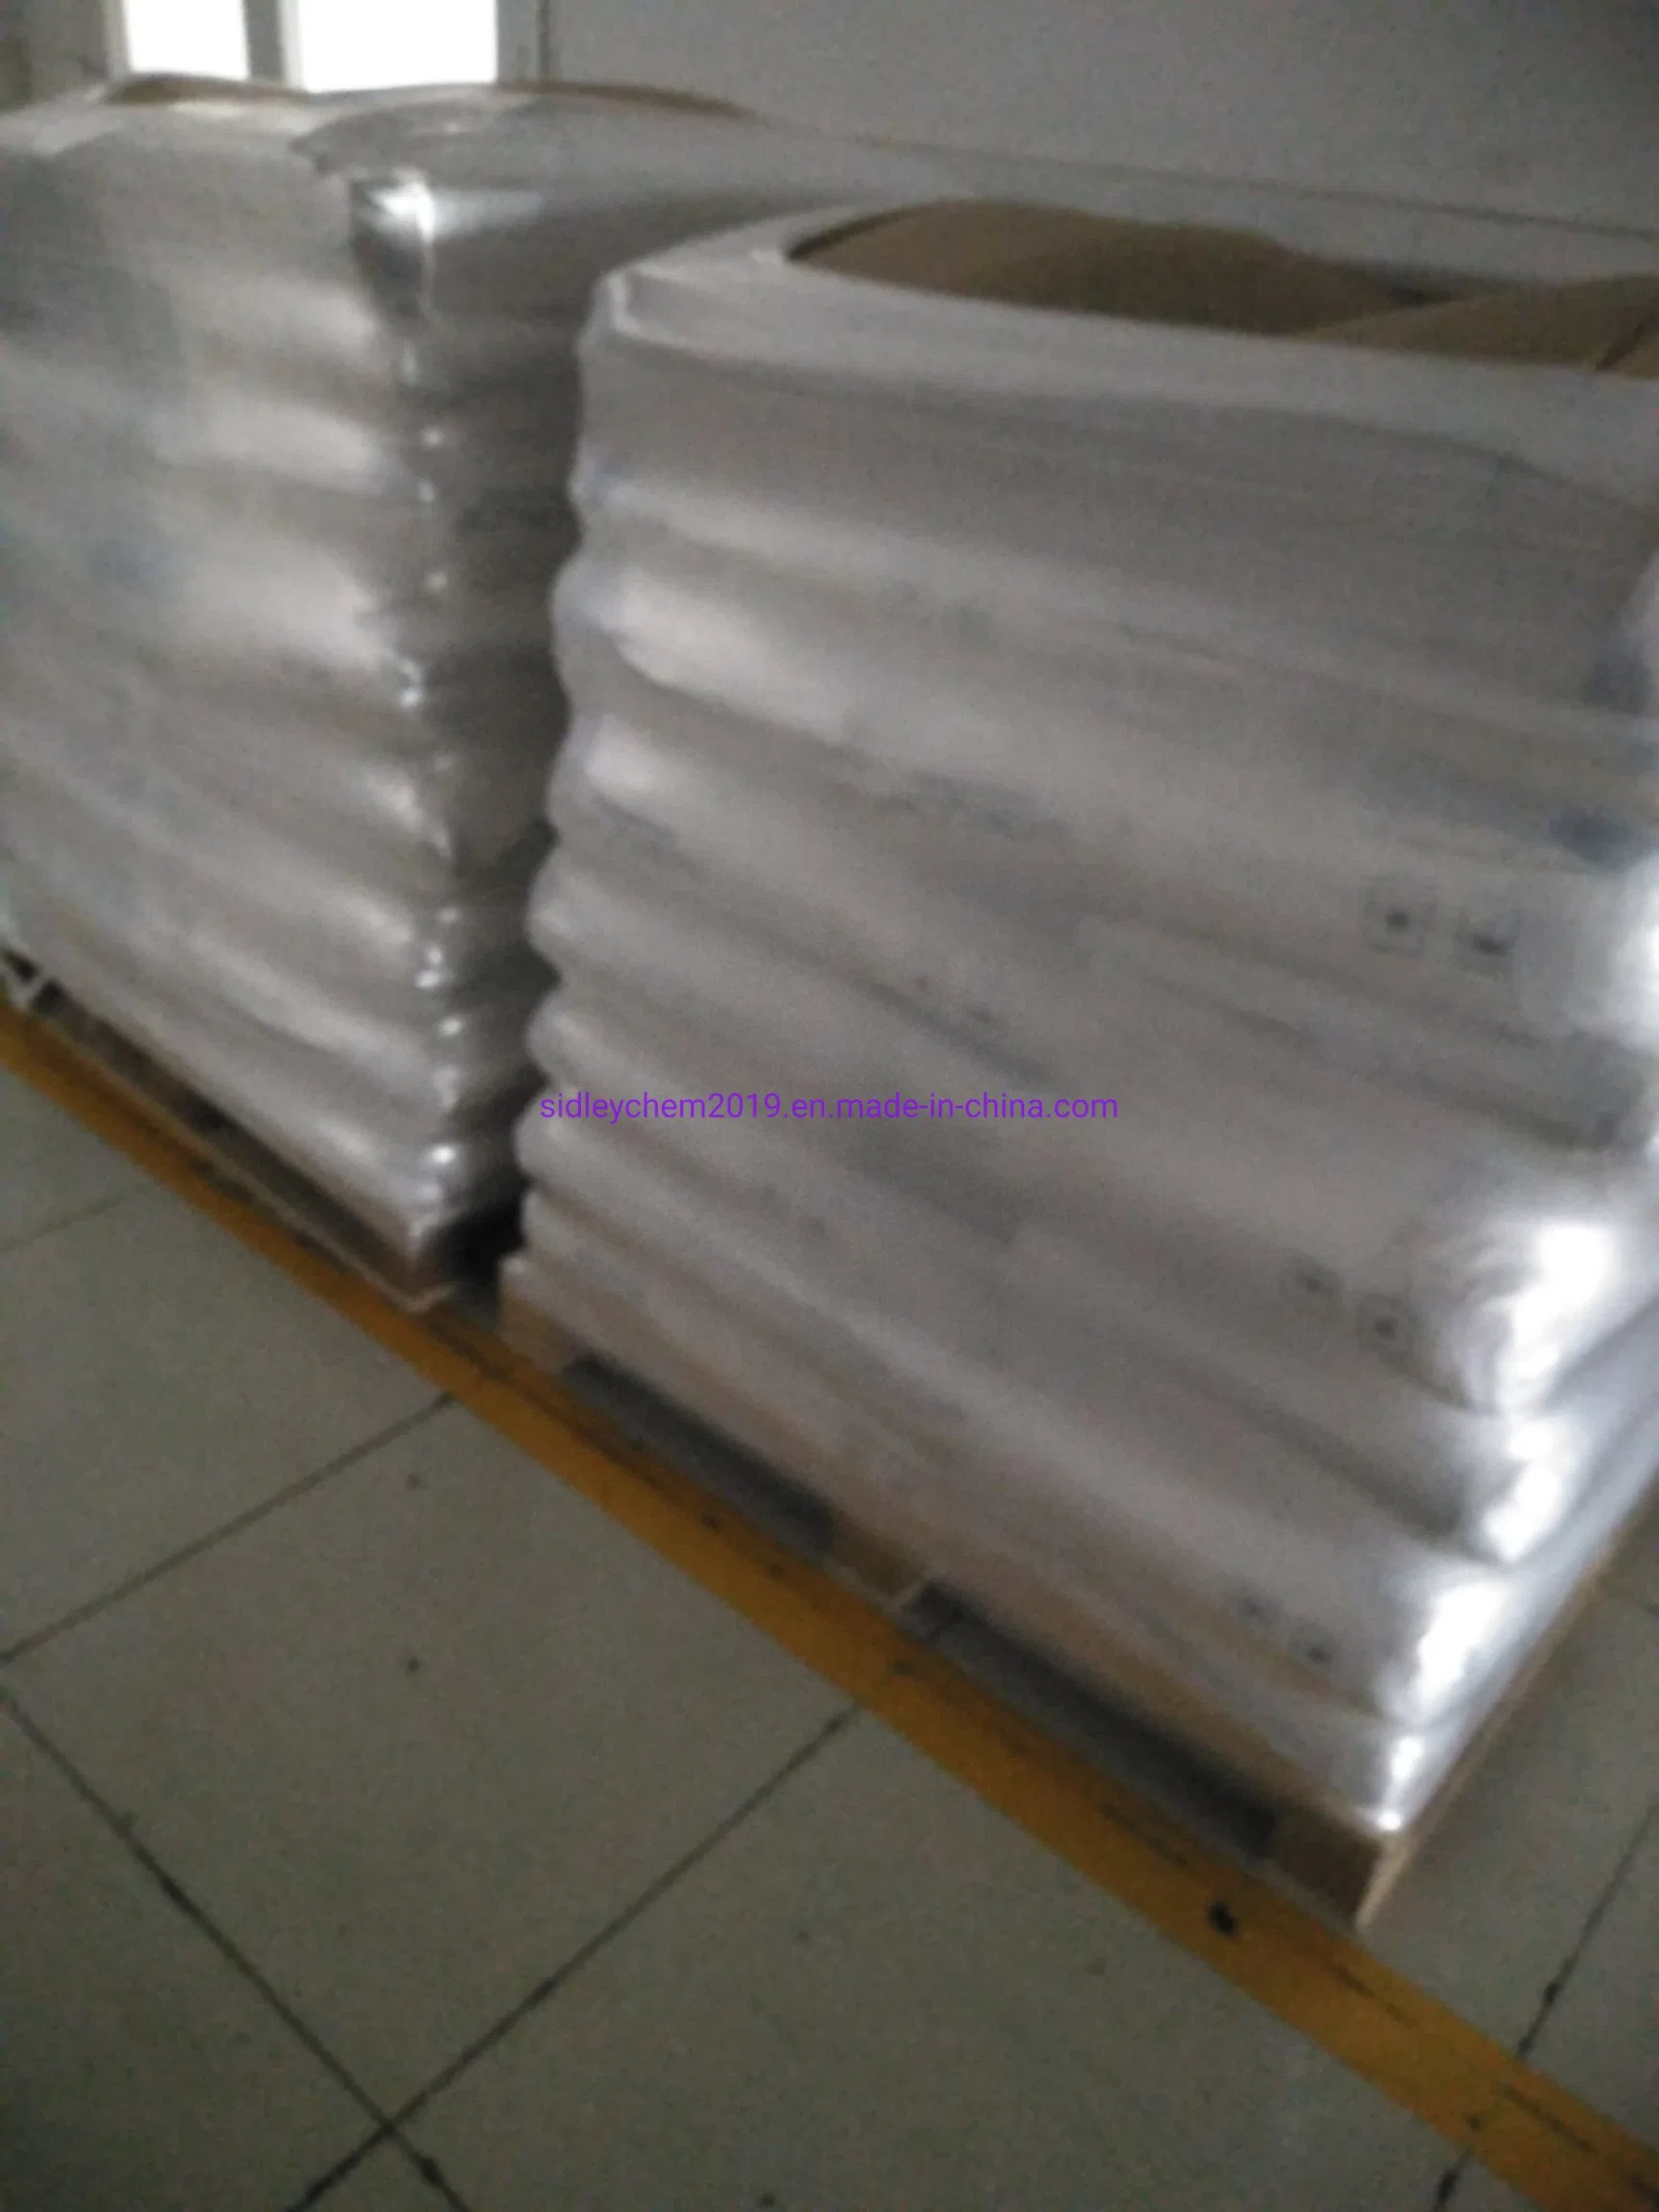 Hydroxy Ethyl Cellulose /Raw Material HEC for Daily Use